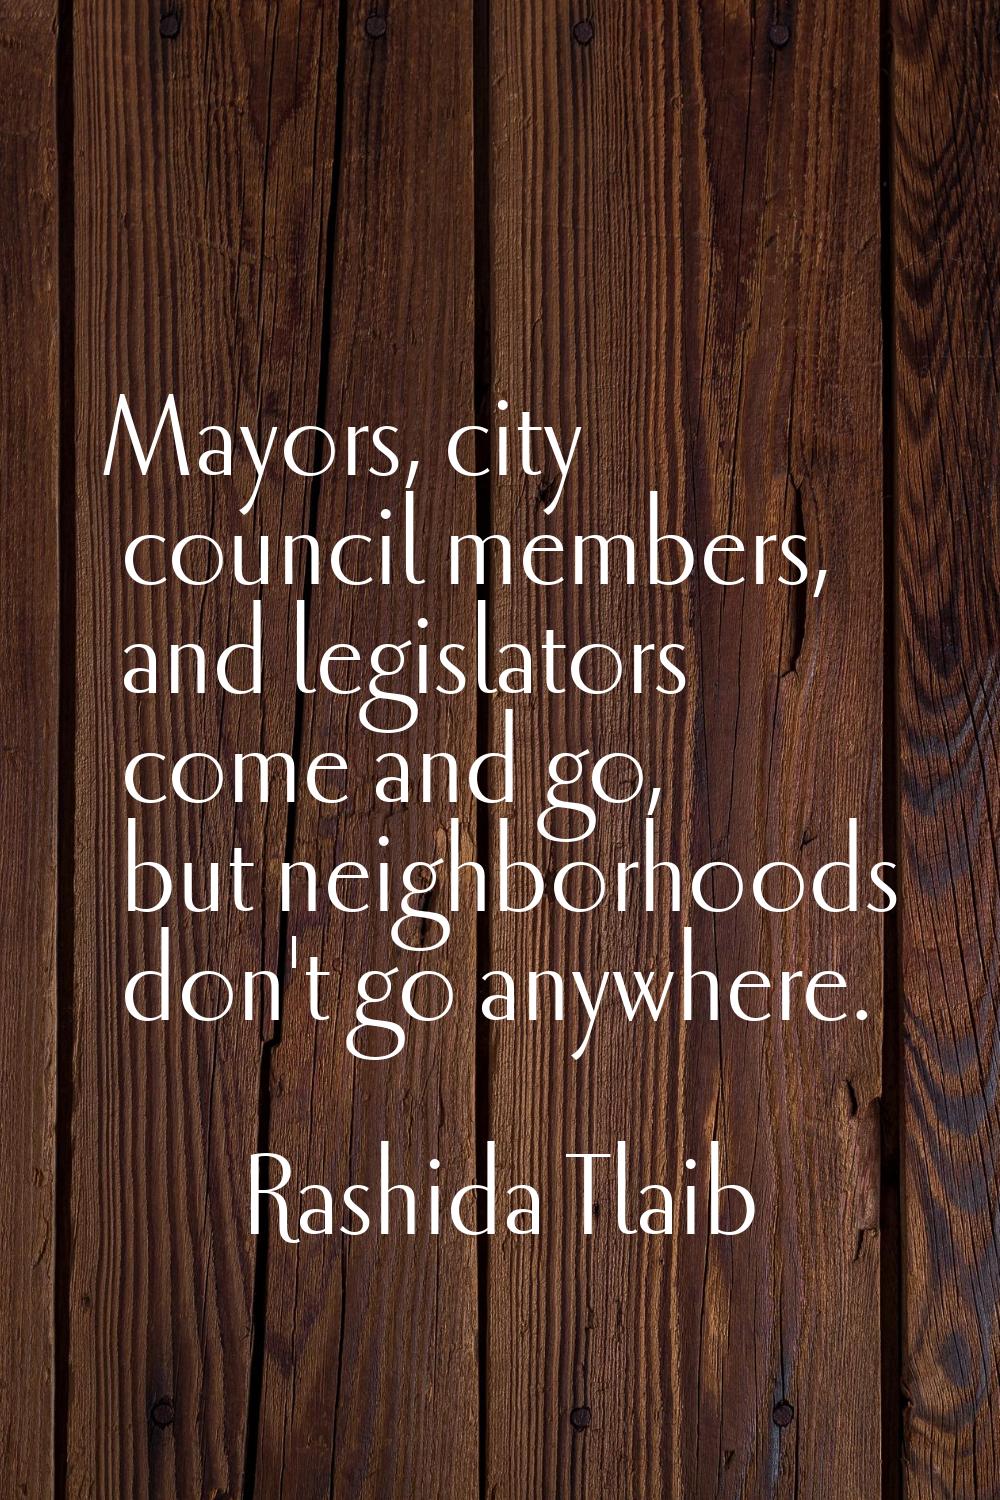 Mayors, city council members, and legislators come and go, but neighborhoods don't go anywhere.